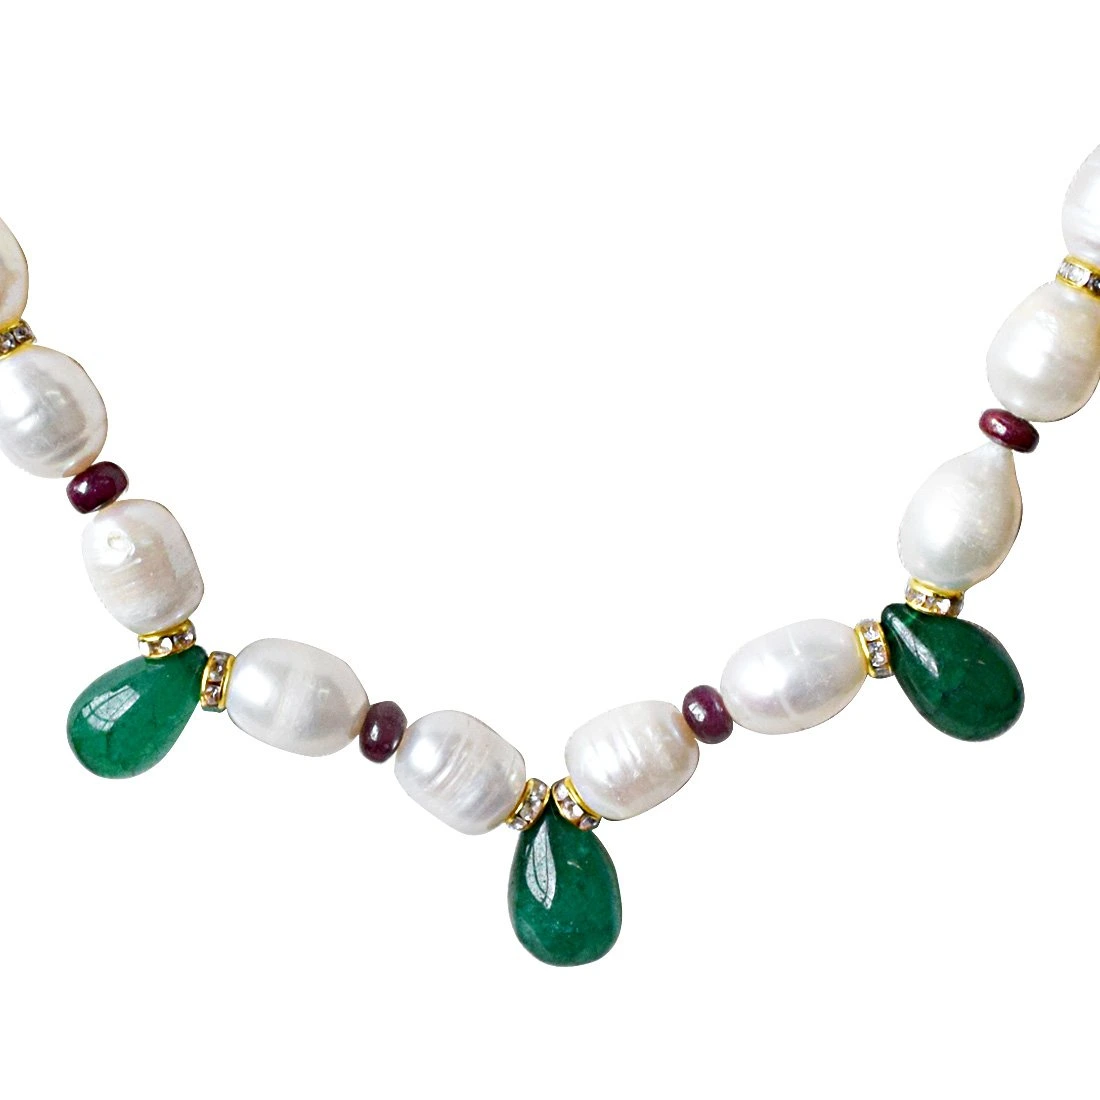 Single Line Drop Green Onyx, Red Ruby Beads, Stone Ring and Big Elongated Pearl Necklace for Women (SN914)